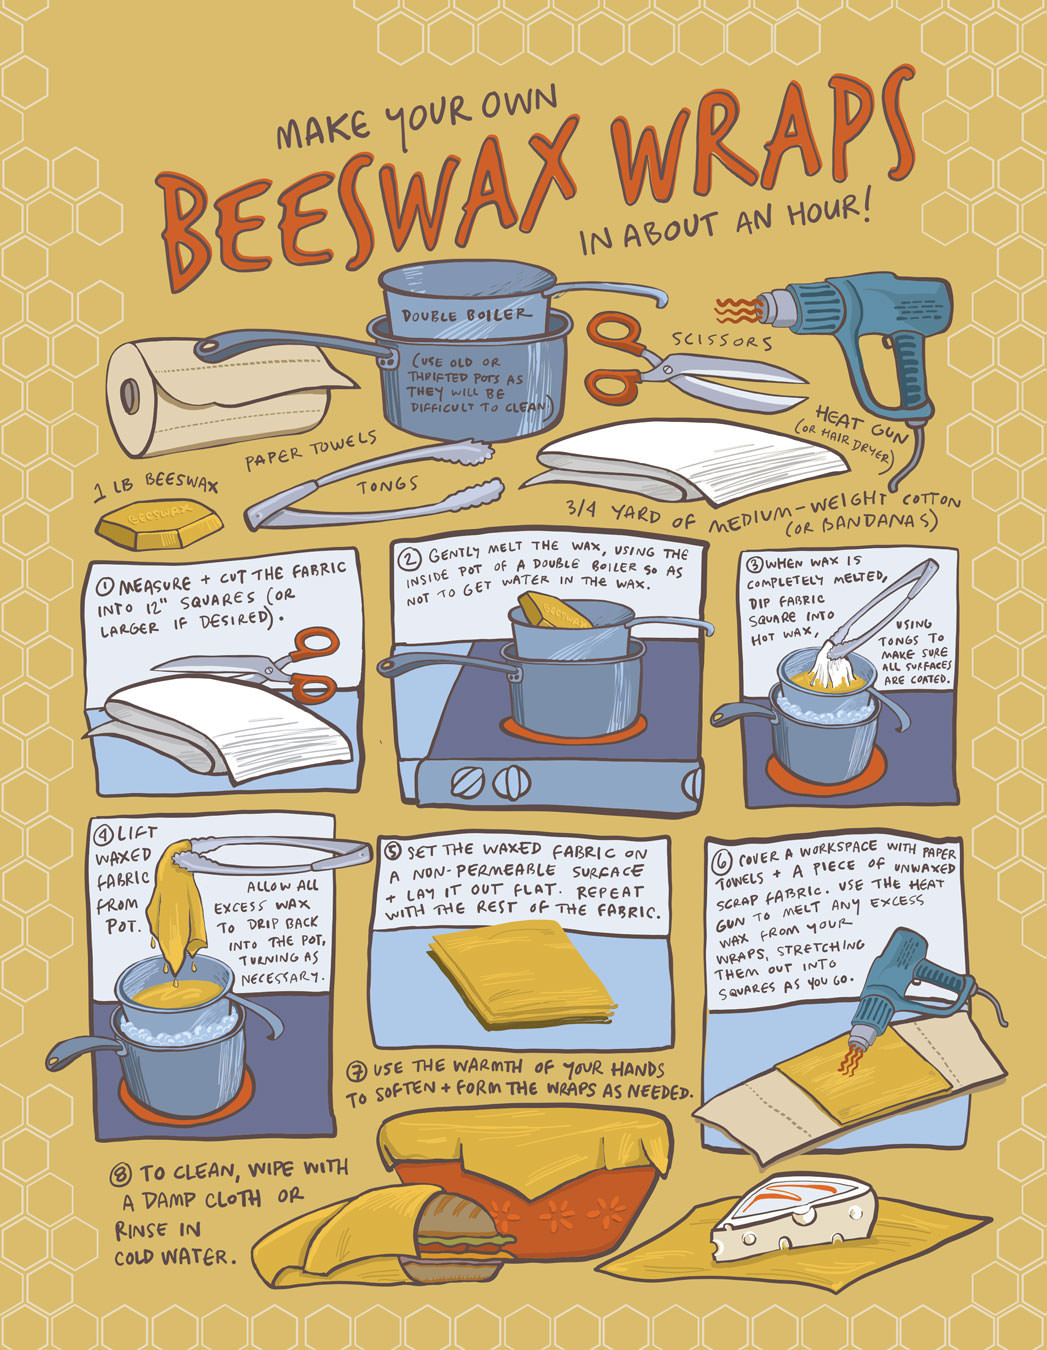 Spring 2020: Make Your Own Beeswax Wraps